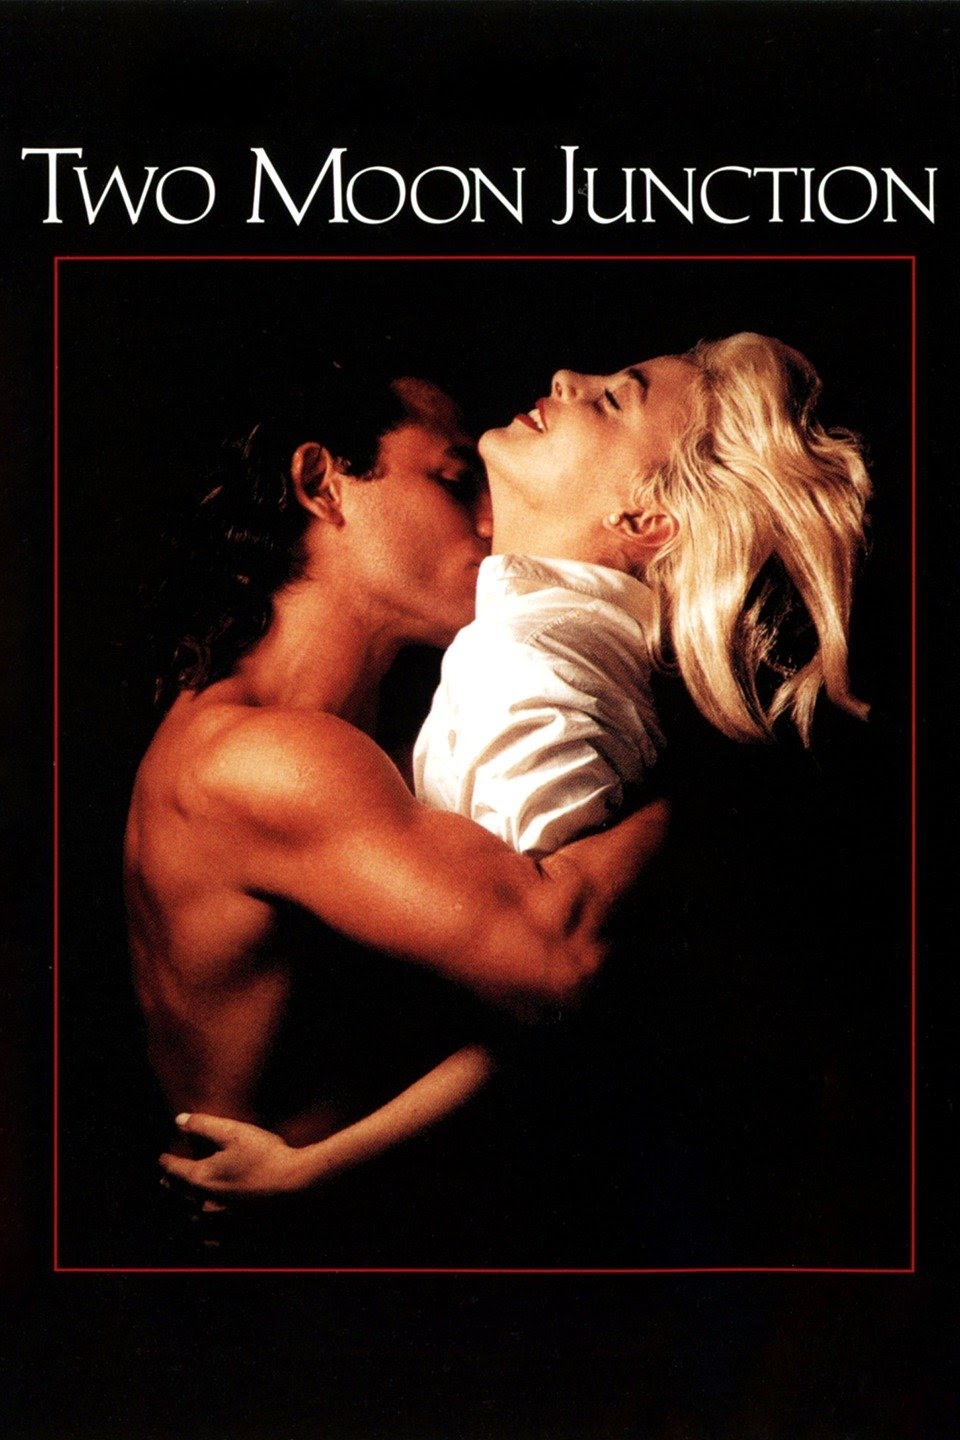 [18+] Two Moon Junction (1988)